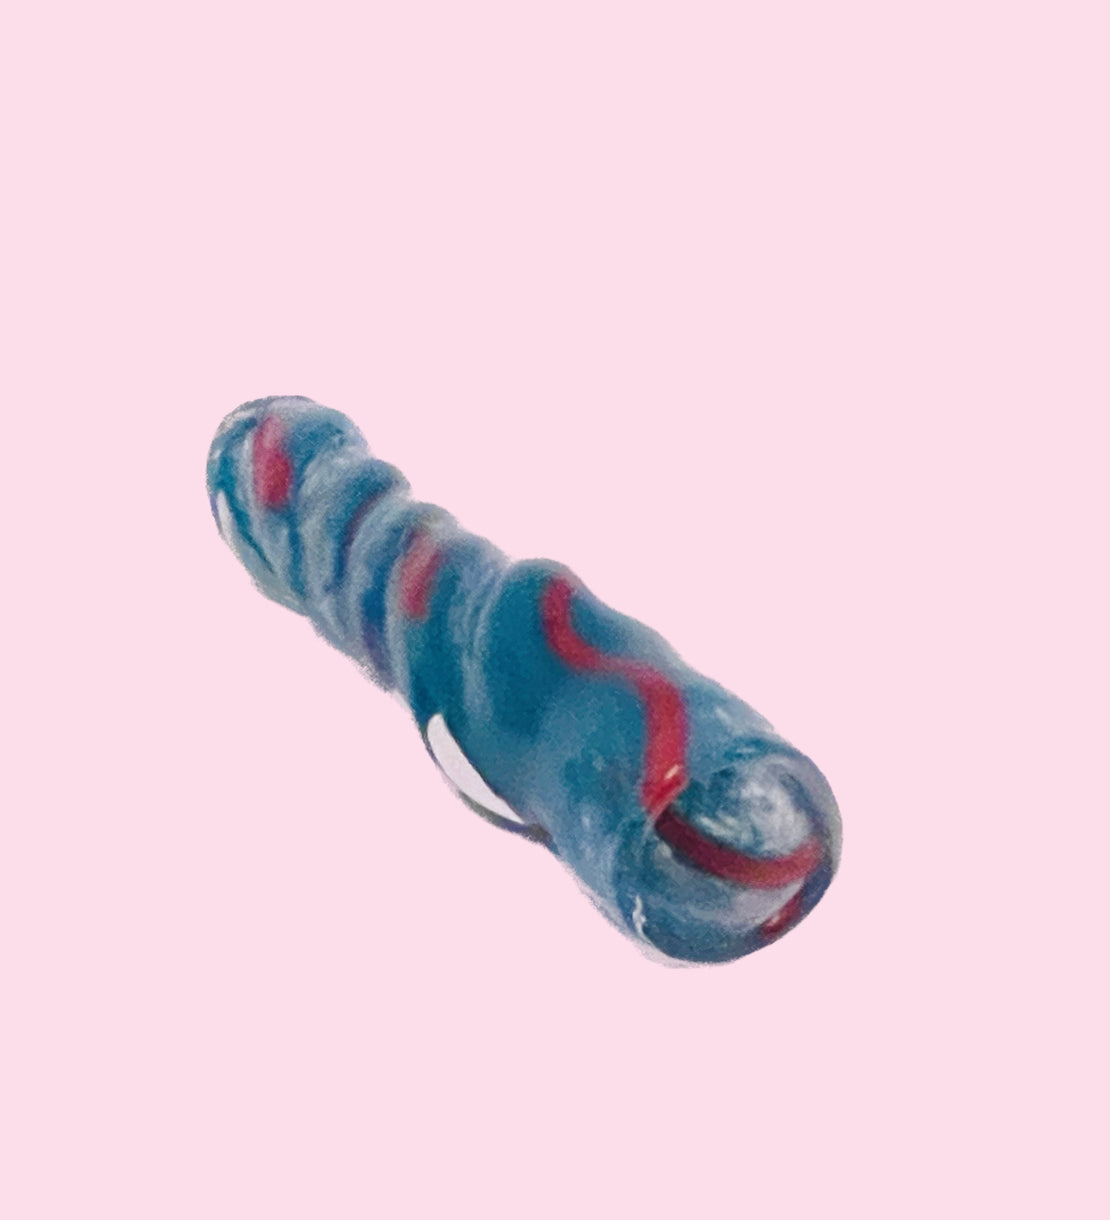 3" Teal and Red Swirl Twisted Chillum